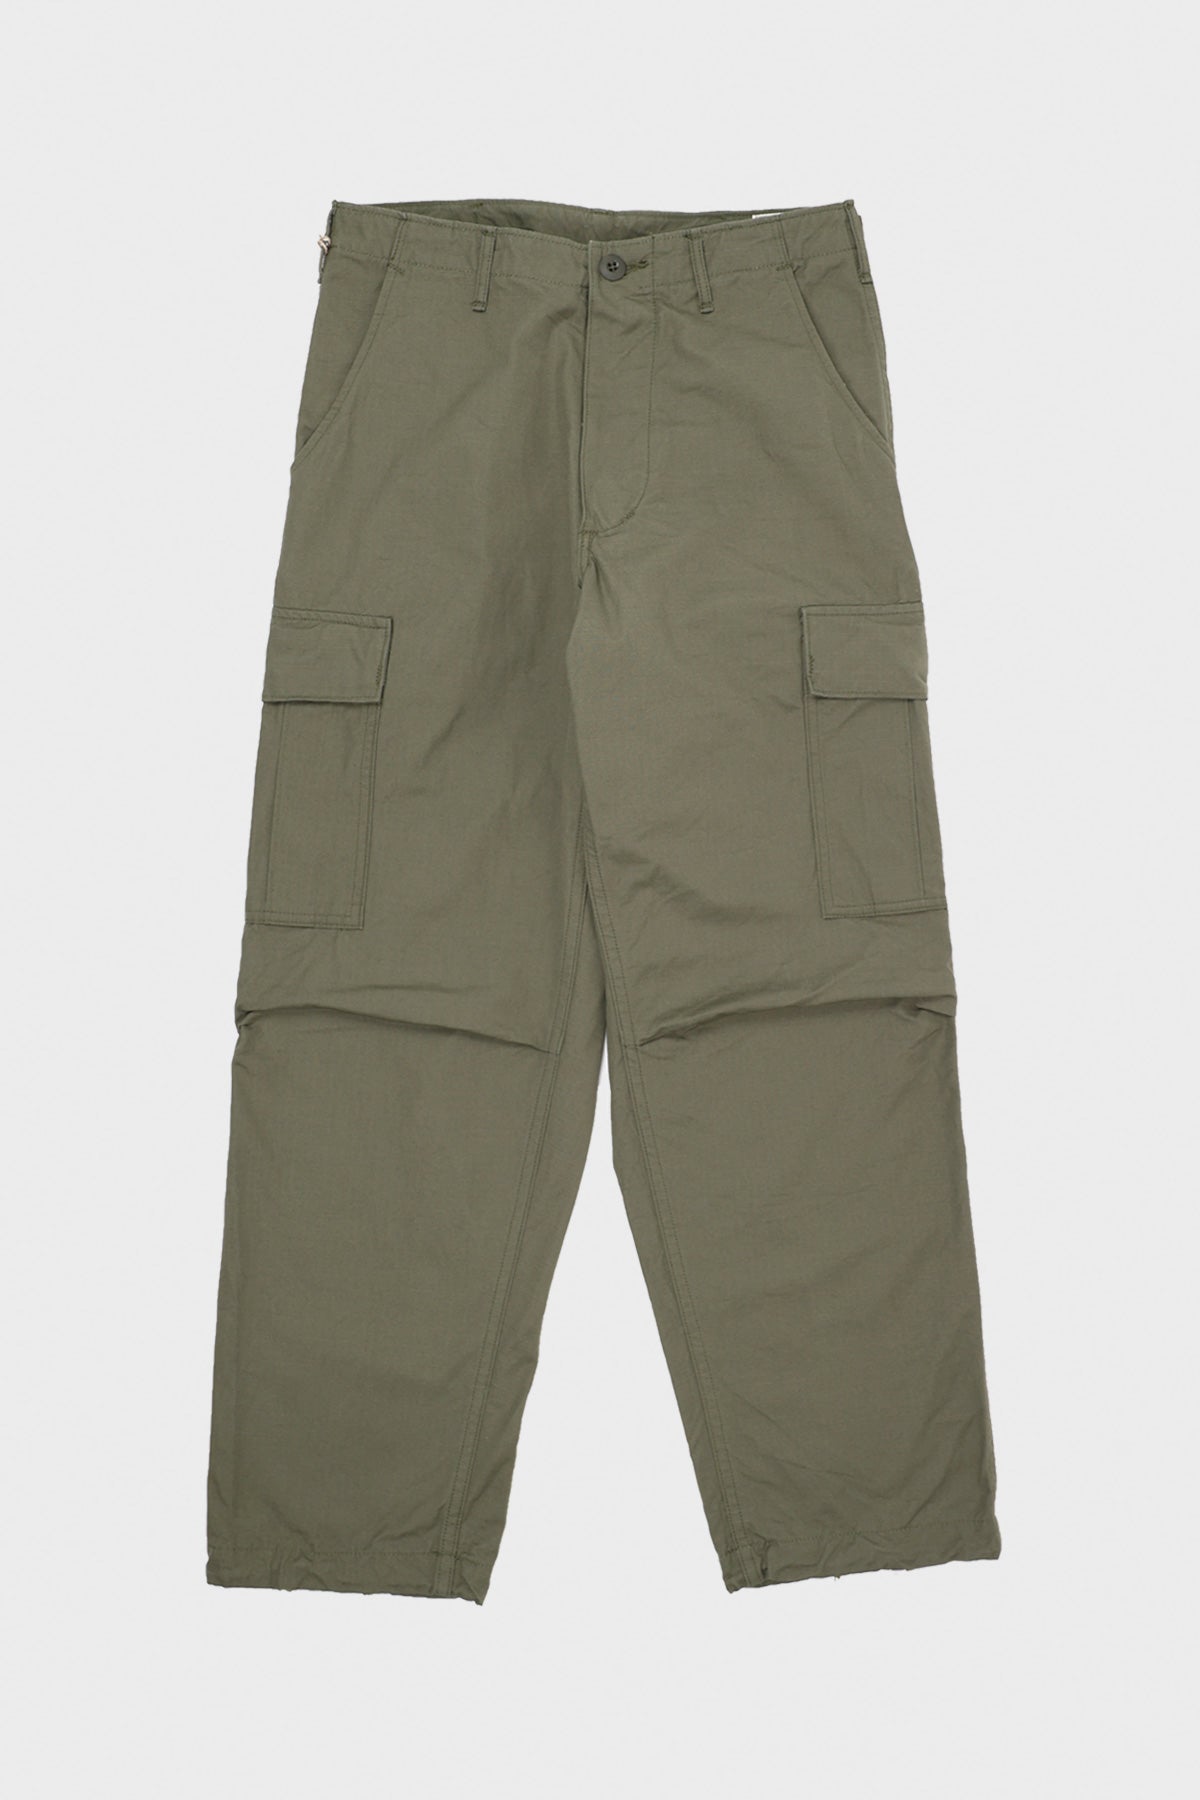 orSlow - Vintage Fit 6 Pocket Cargo Pant - Olive Ripstop - Canoe Club